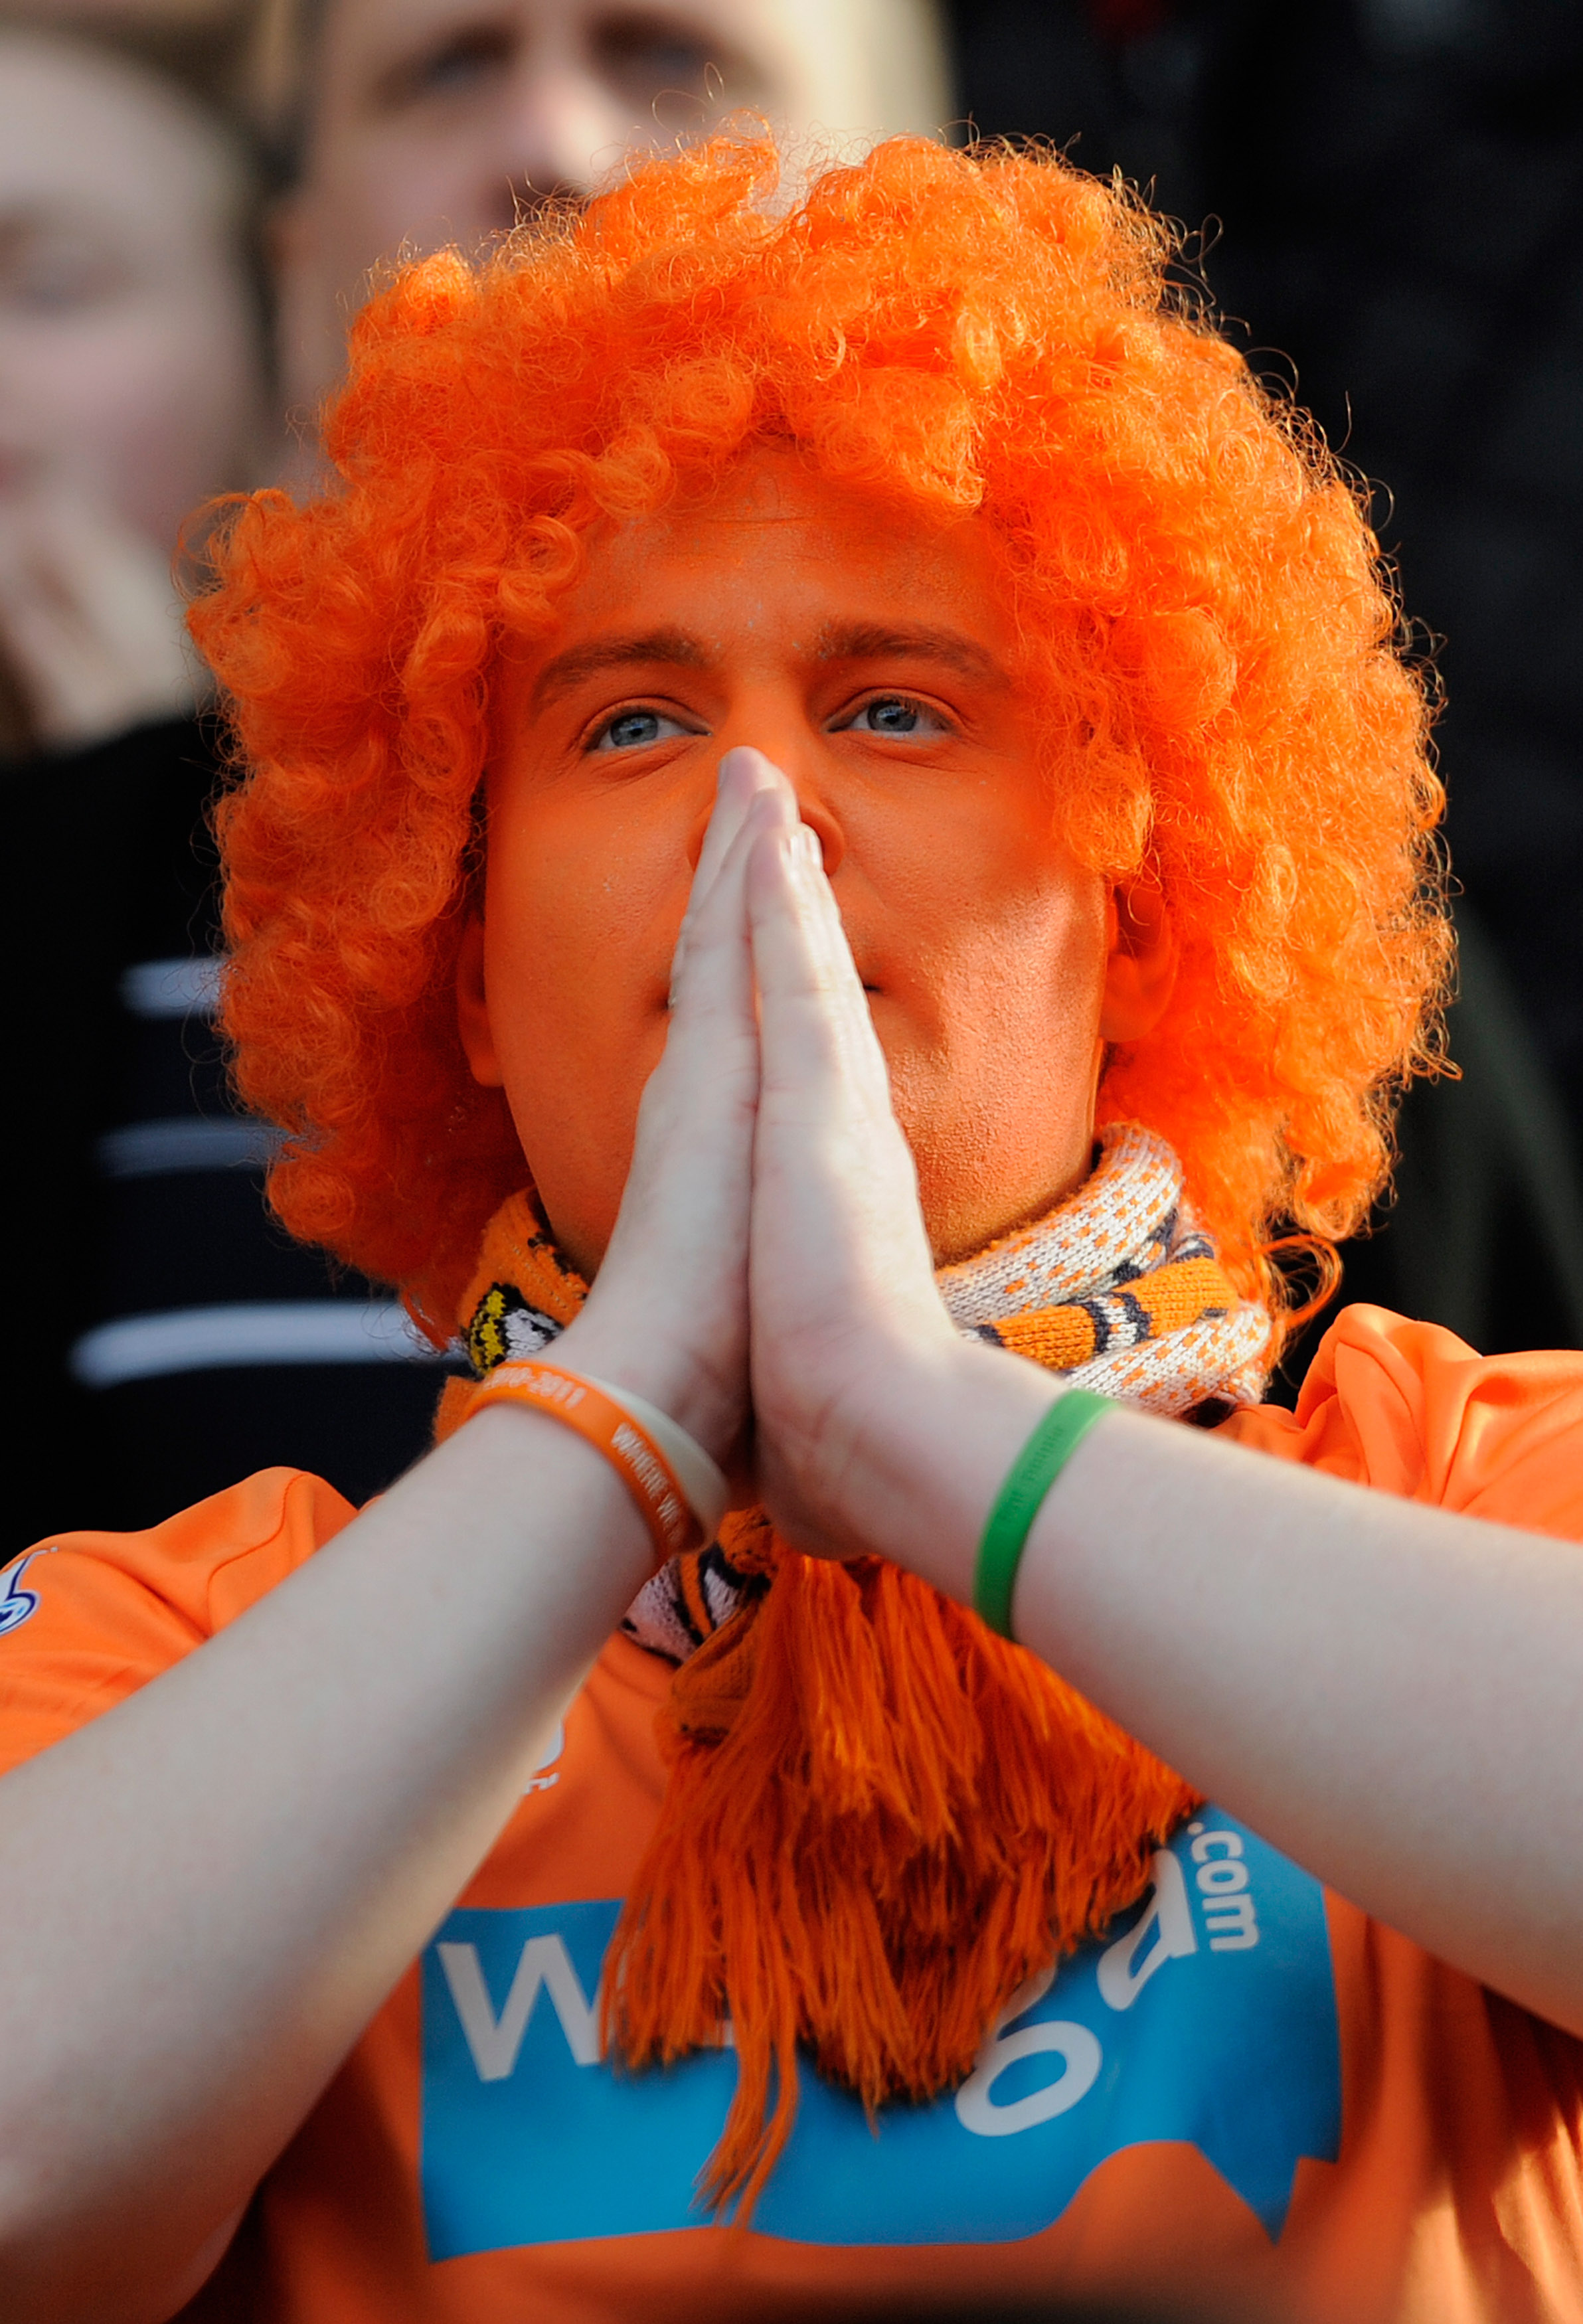 BLACKBURN, ENGLAND - MARCH 19: A Blackpool fan looks on as Charlie Adam steps up to take his penalty to make it 1-0 during the Barclays Premier League match between Blackburn Rovers and Blackpool at Ewood Park on March 19, 2011 in Blackburn, England.  (Ph